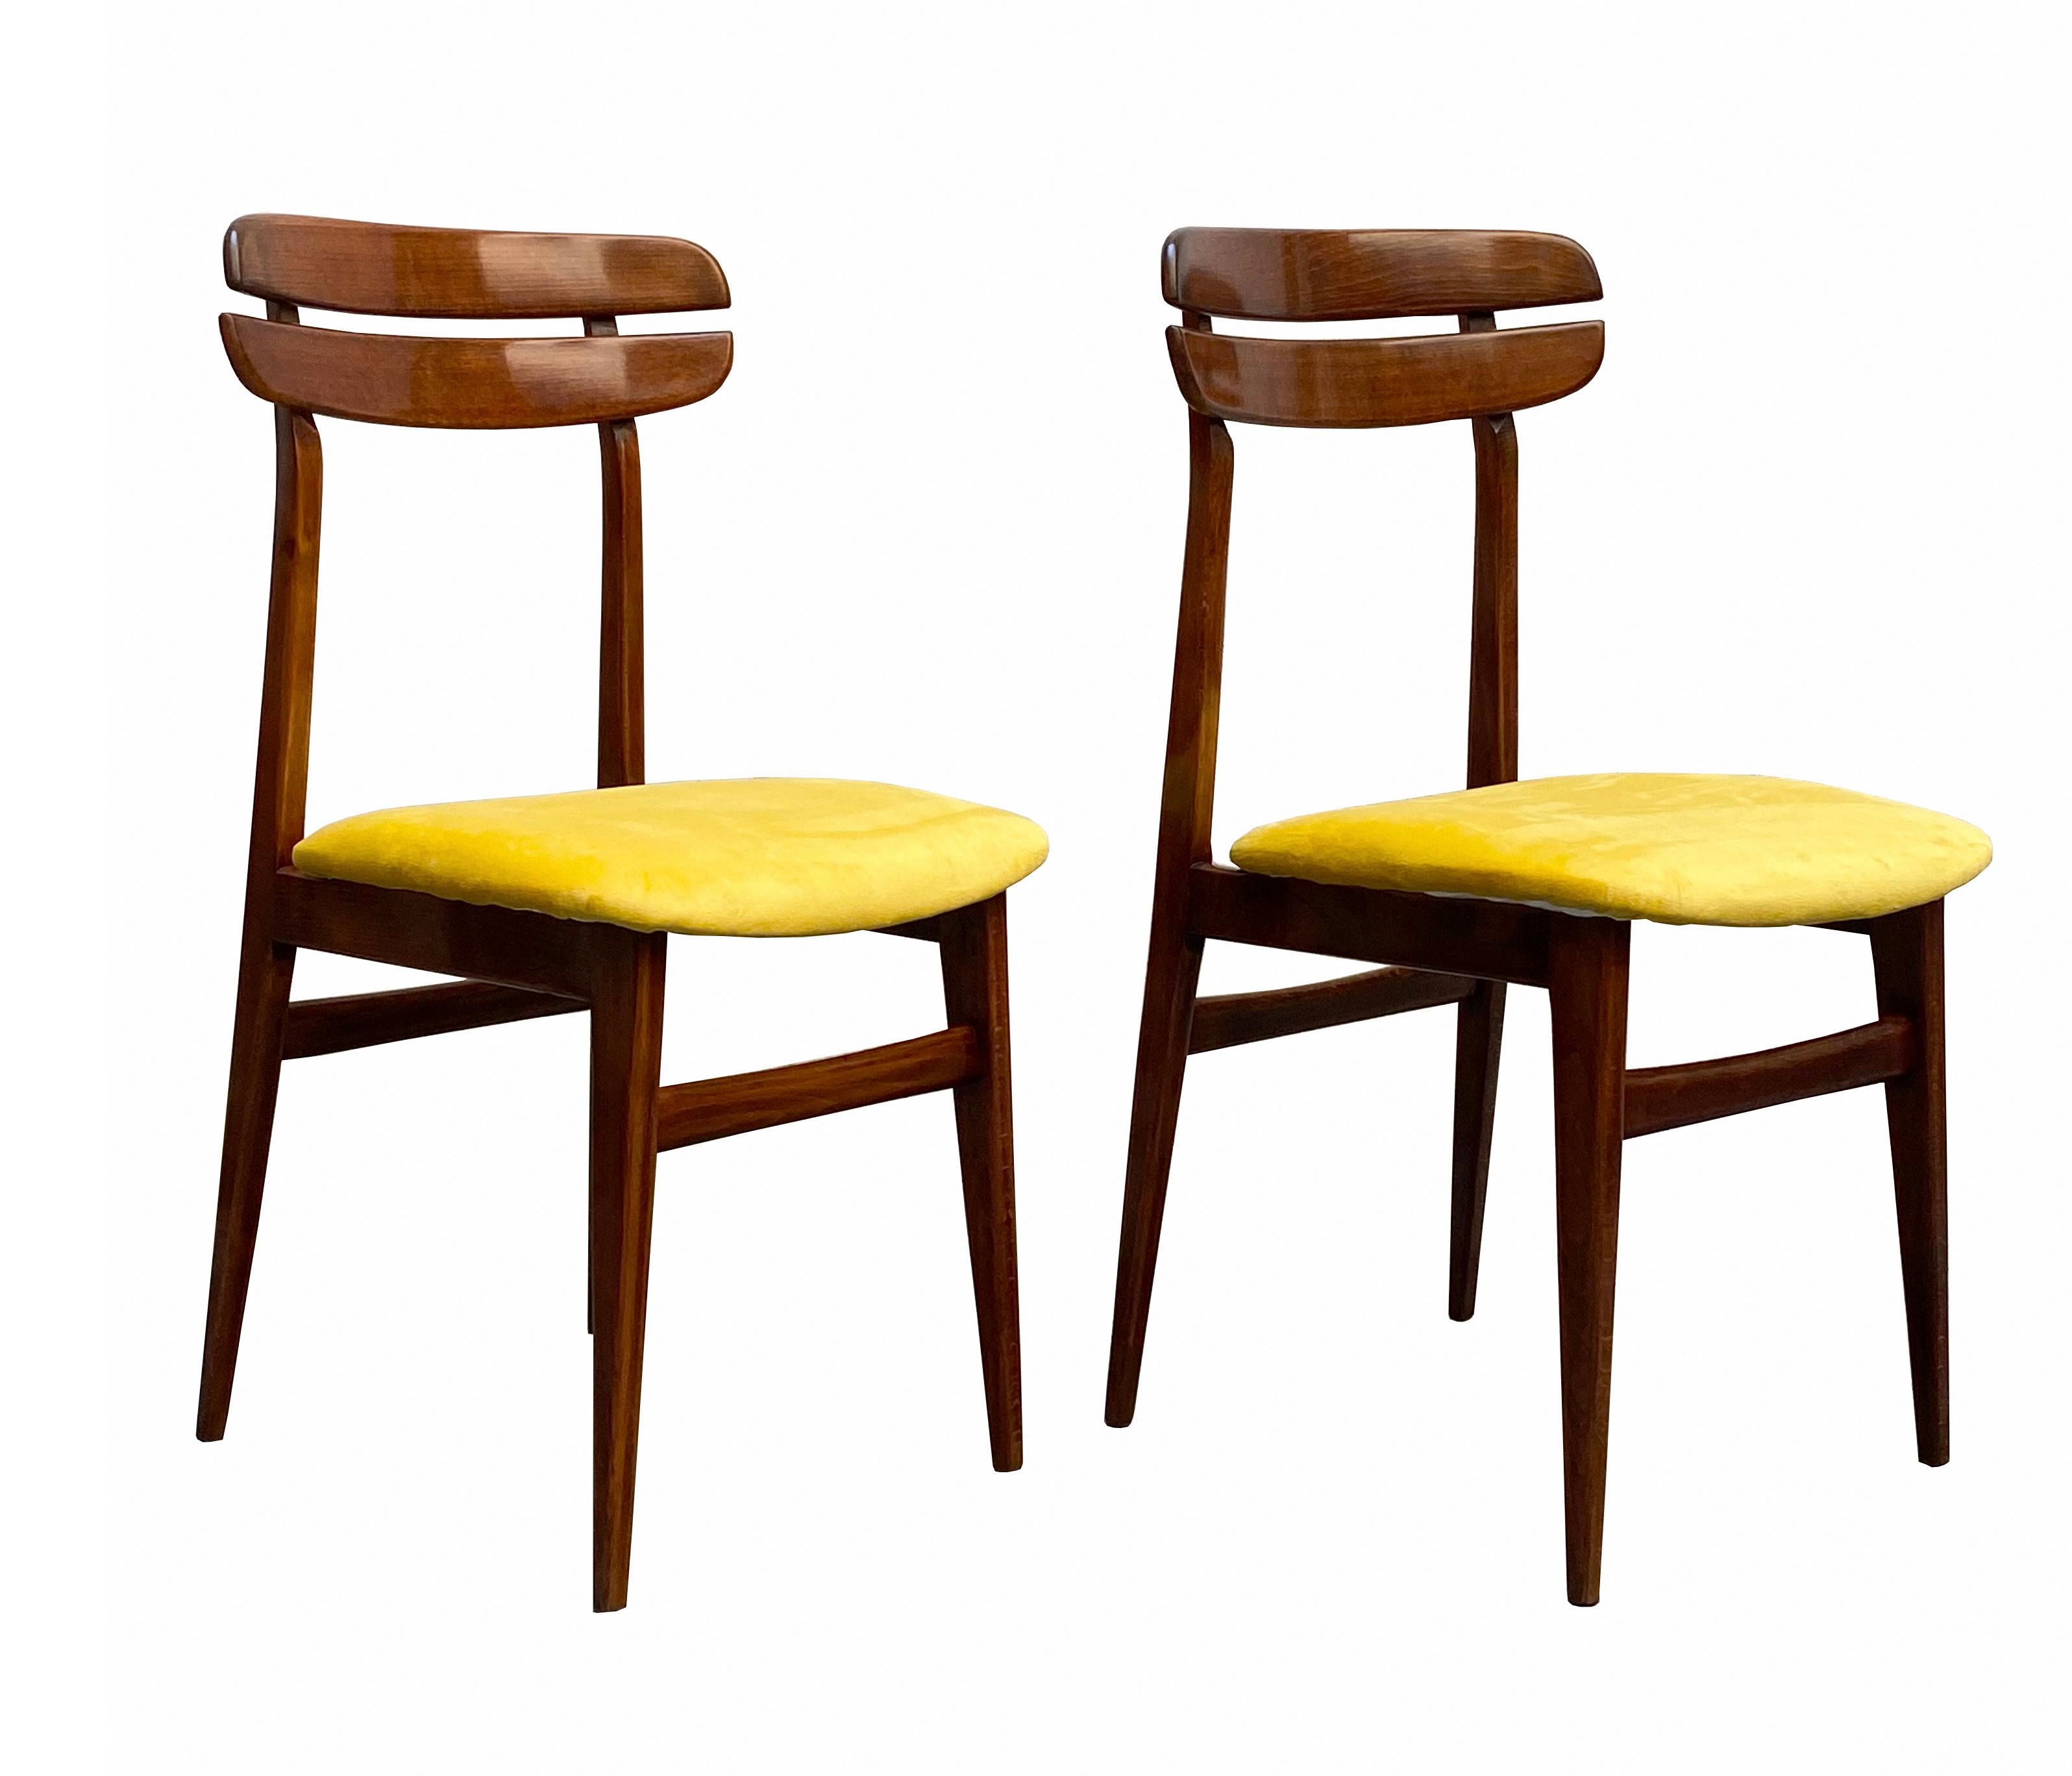 Set of 2 chairs made of teak wood and upholstered seat with yellow fabric cover, Danish Design 1960, in excellent condition.
   